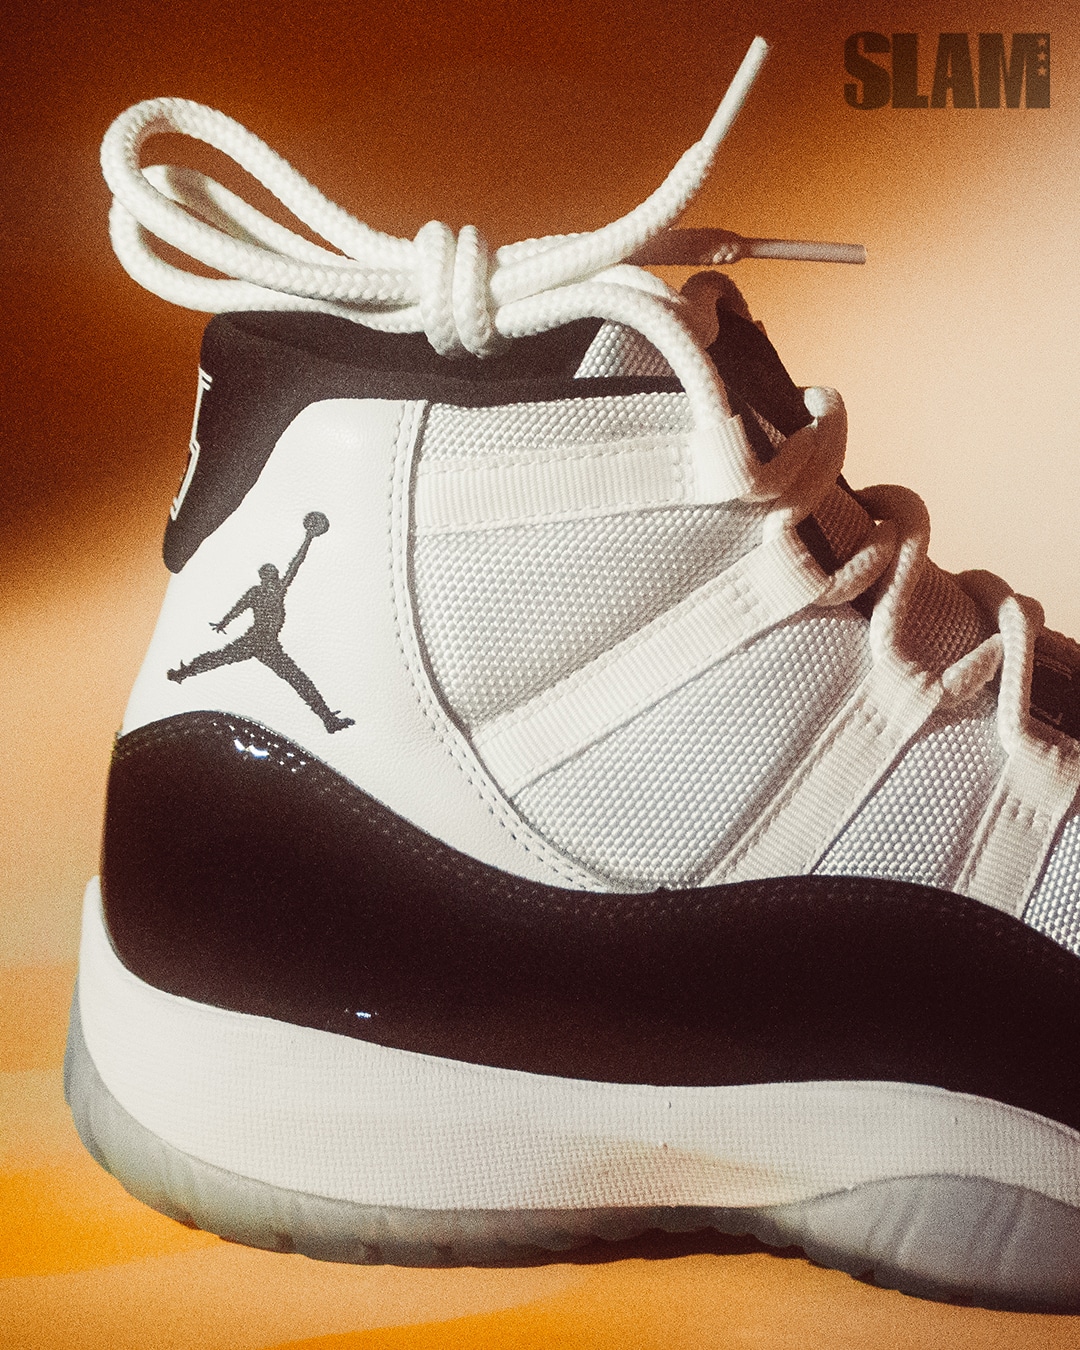 Legacy, Legacy, Legacy: The 'Concord' Air Jordan XI's Spot in History Is Undeniable